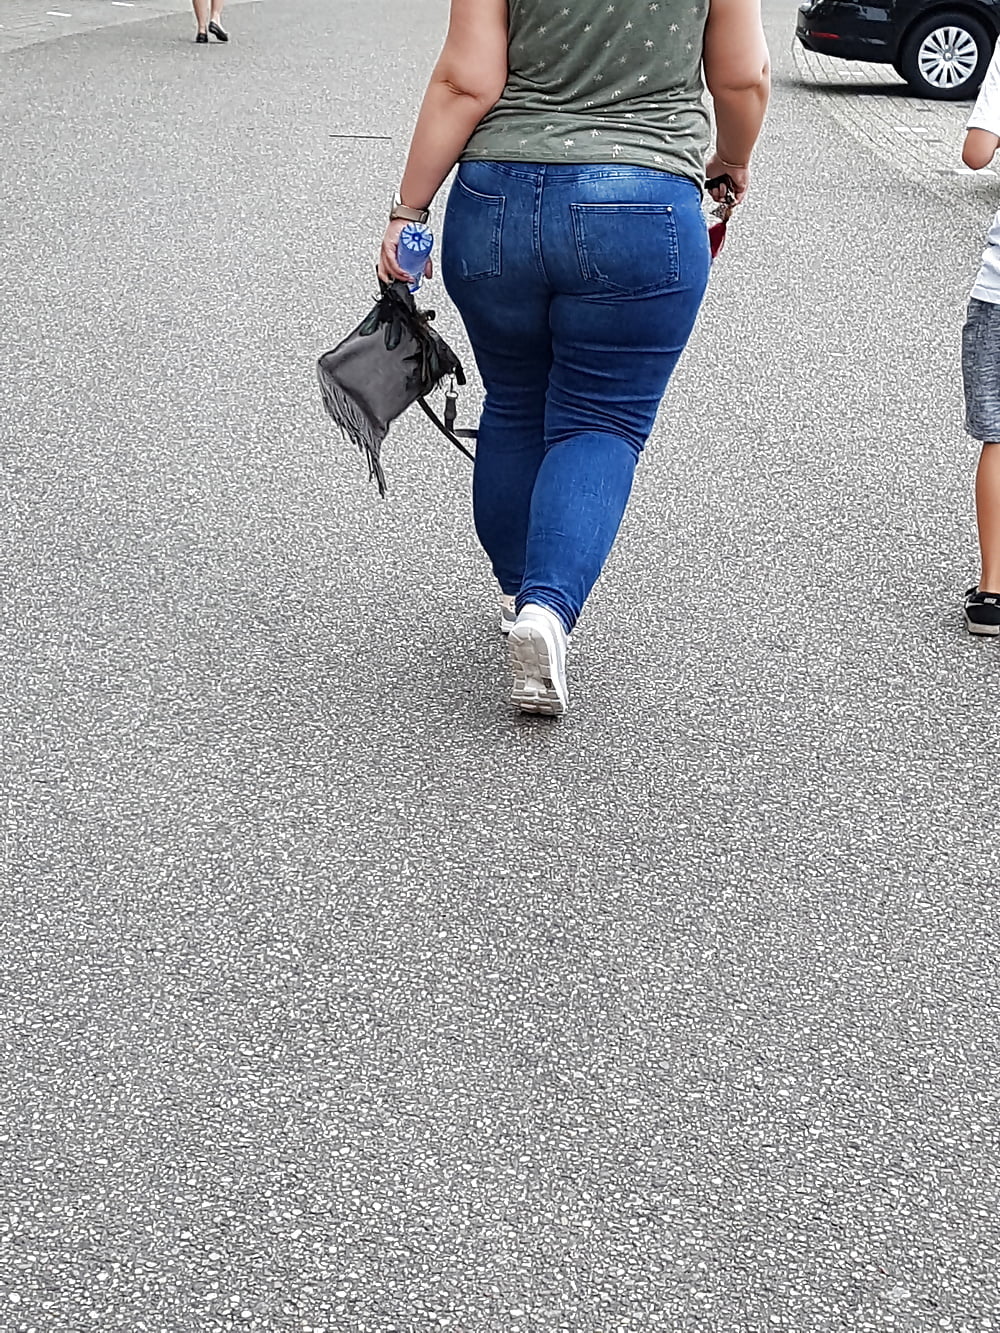 Bbw_milf_with_thick_legs_and_butt_in_tight_jeans (13/34)